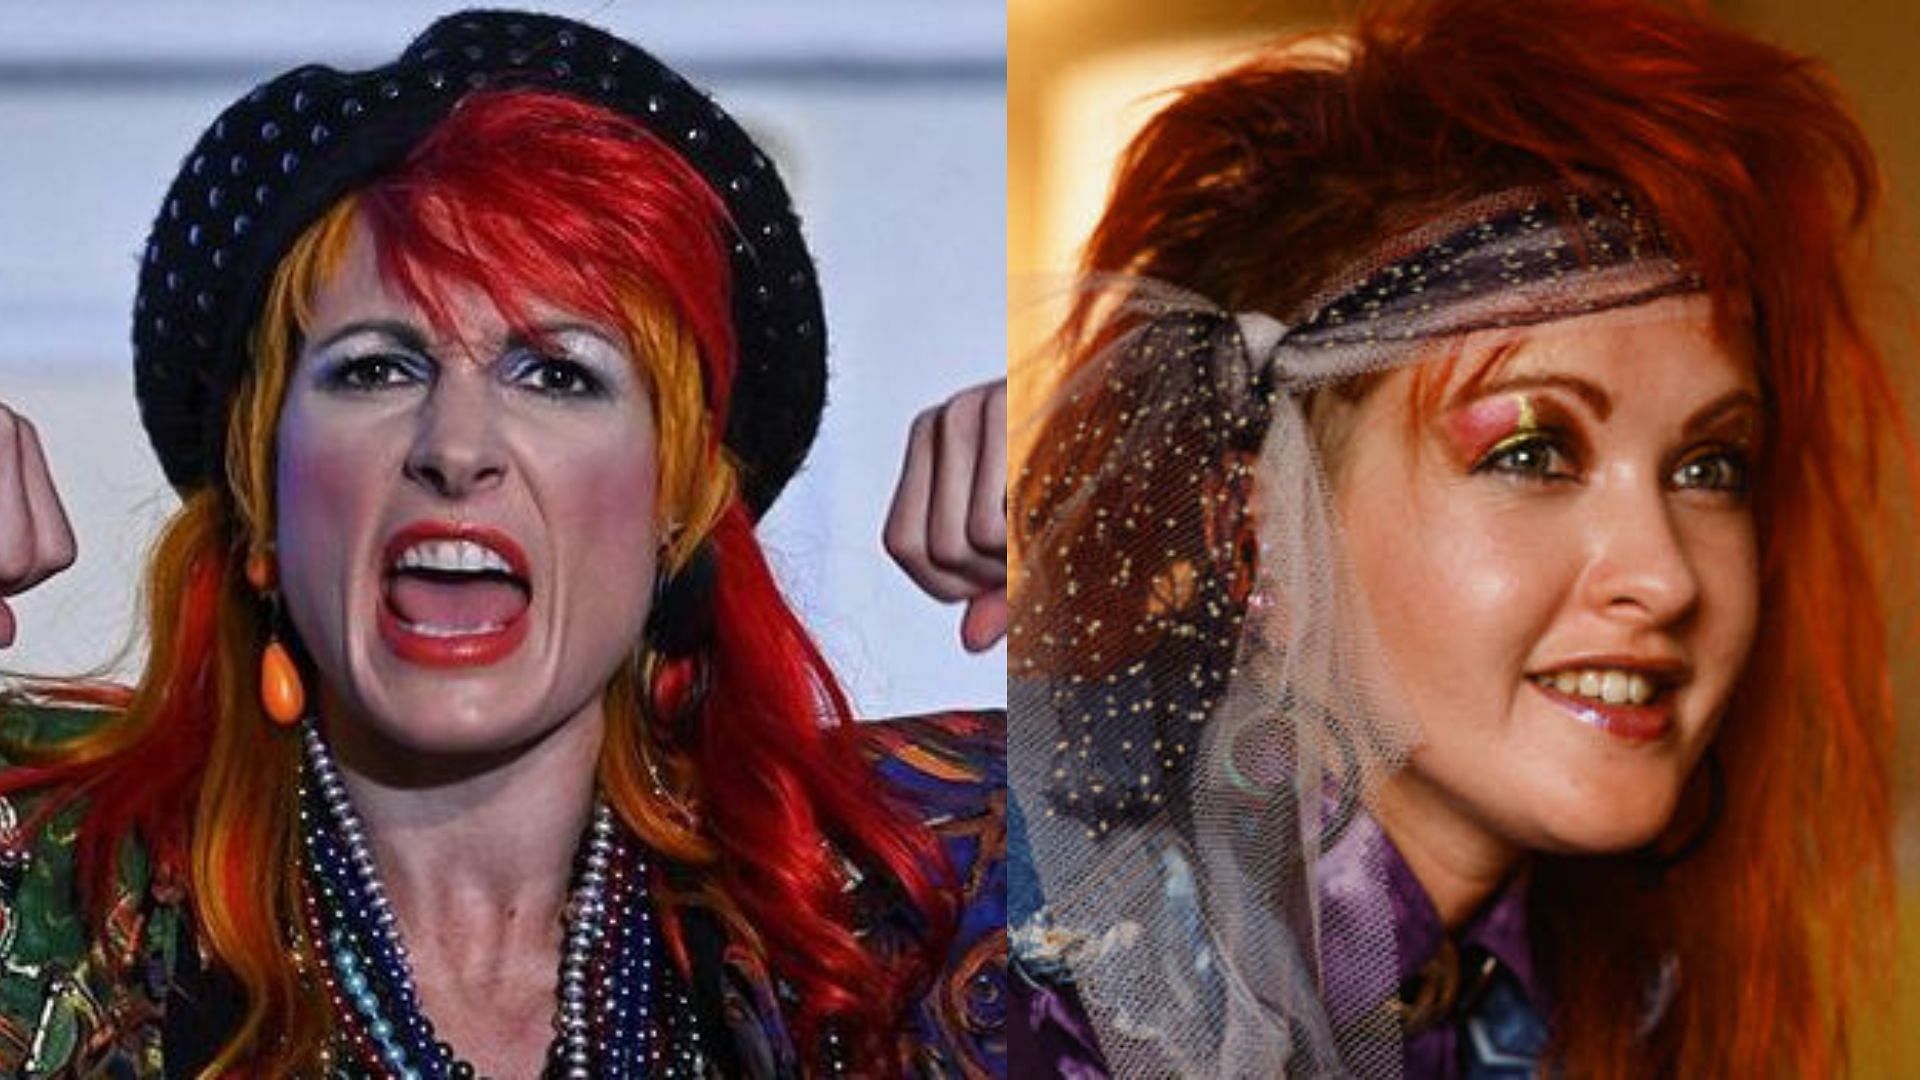 WWE Superstar Becky Lynch will take on the role of Cyndi Lauper